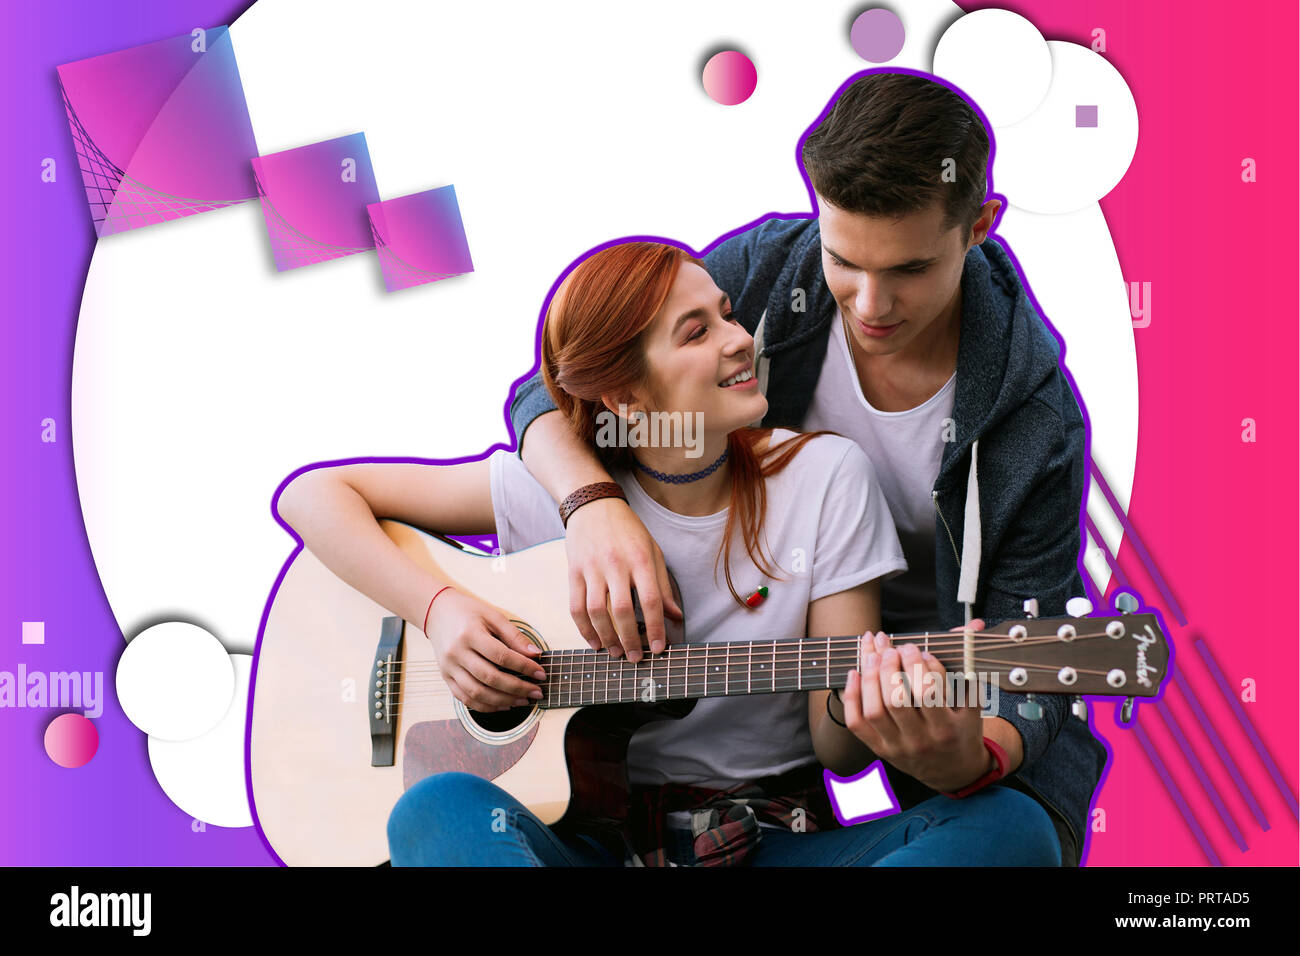 Young girl taking guitar lessons and feeling interested Stock Photo